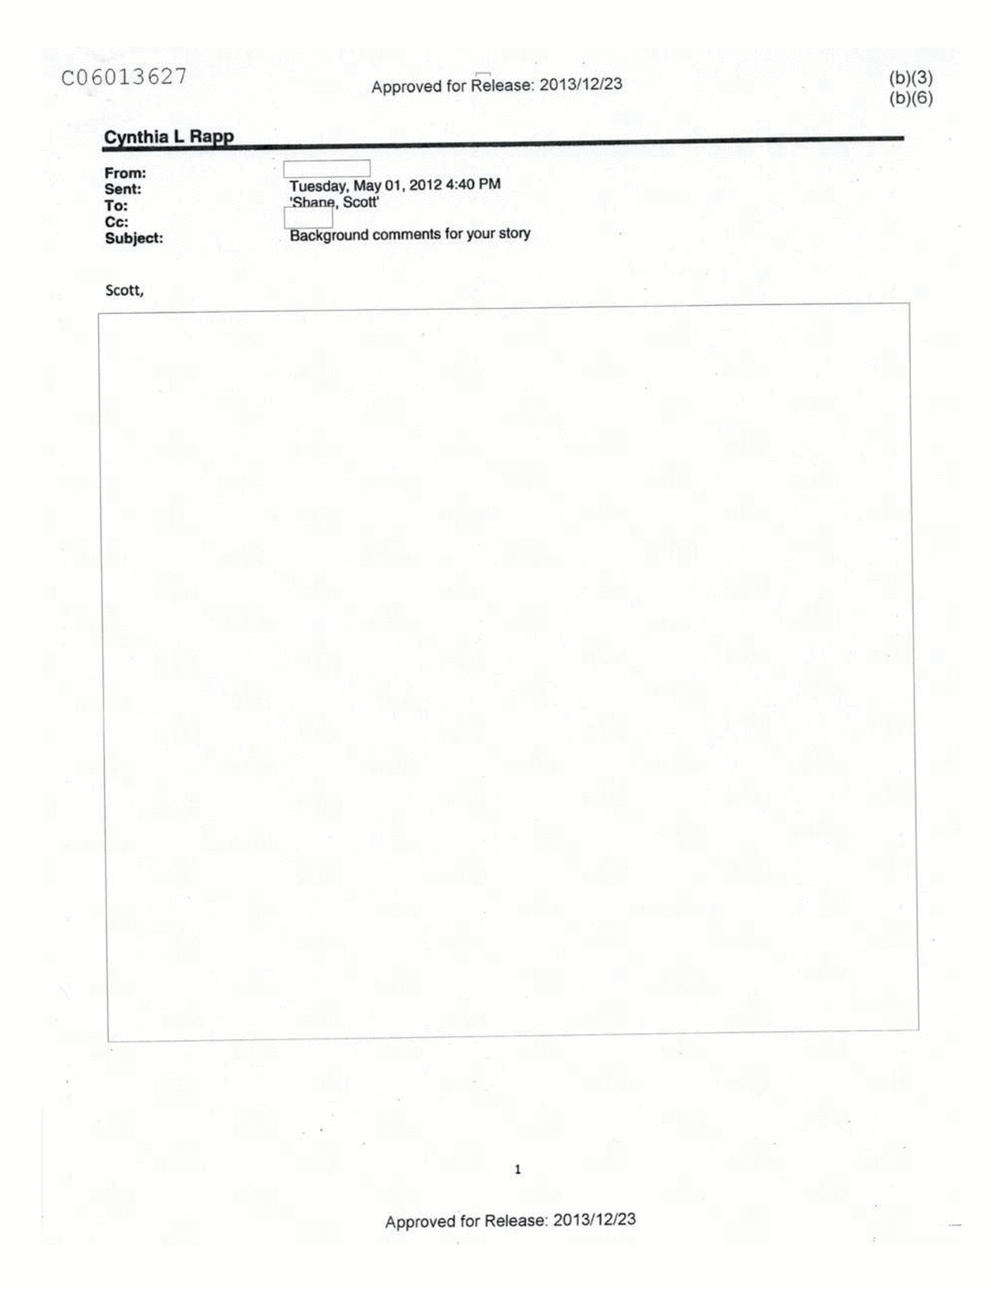 Page 464 from Email Correspondence Between Reporters and CIA Flacks